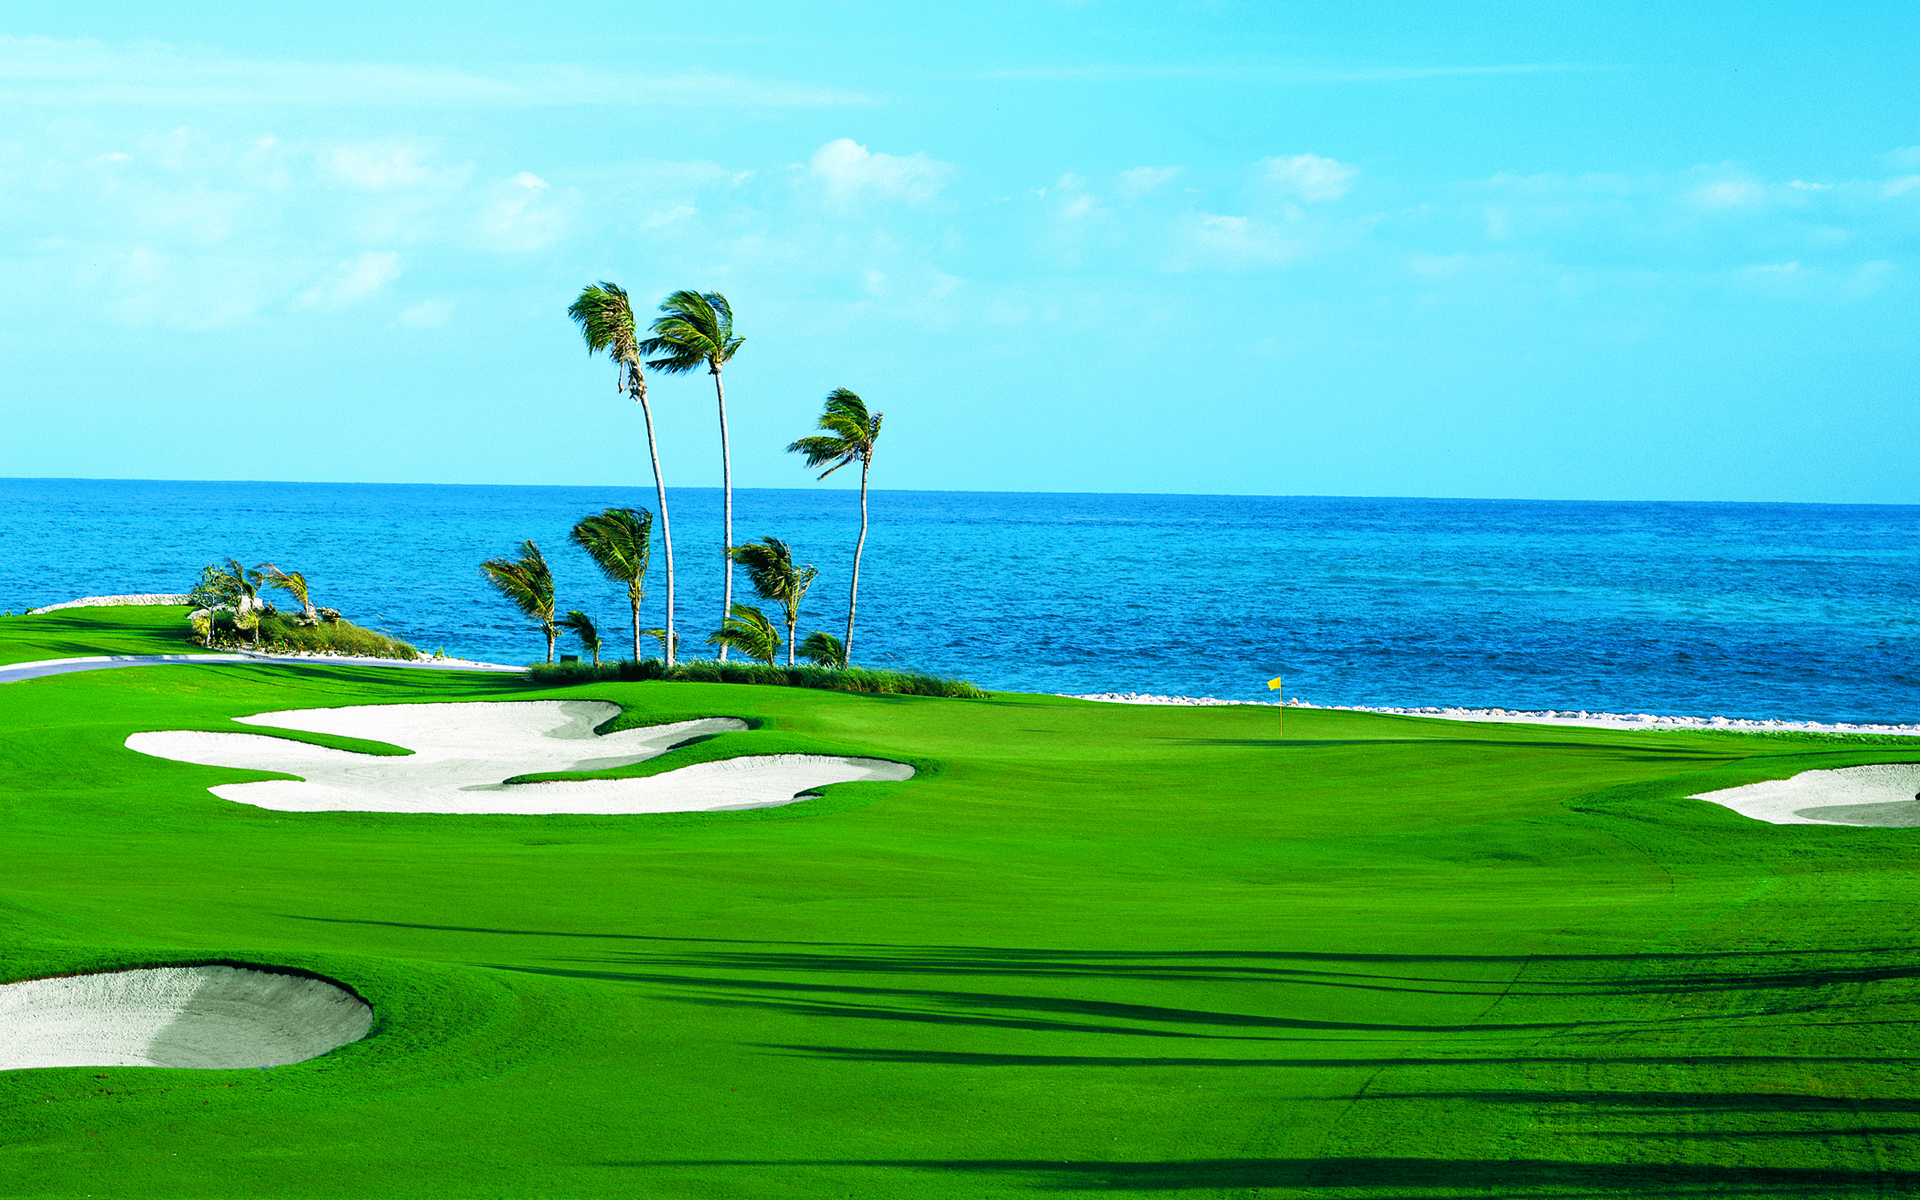 Golf Course: Landscape, Bay, Water, Nature, Shore, Sand, Grass, Field, Coast, Palm trees, Windy, Ocean. 1920x1200 HD Background.